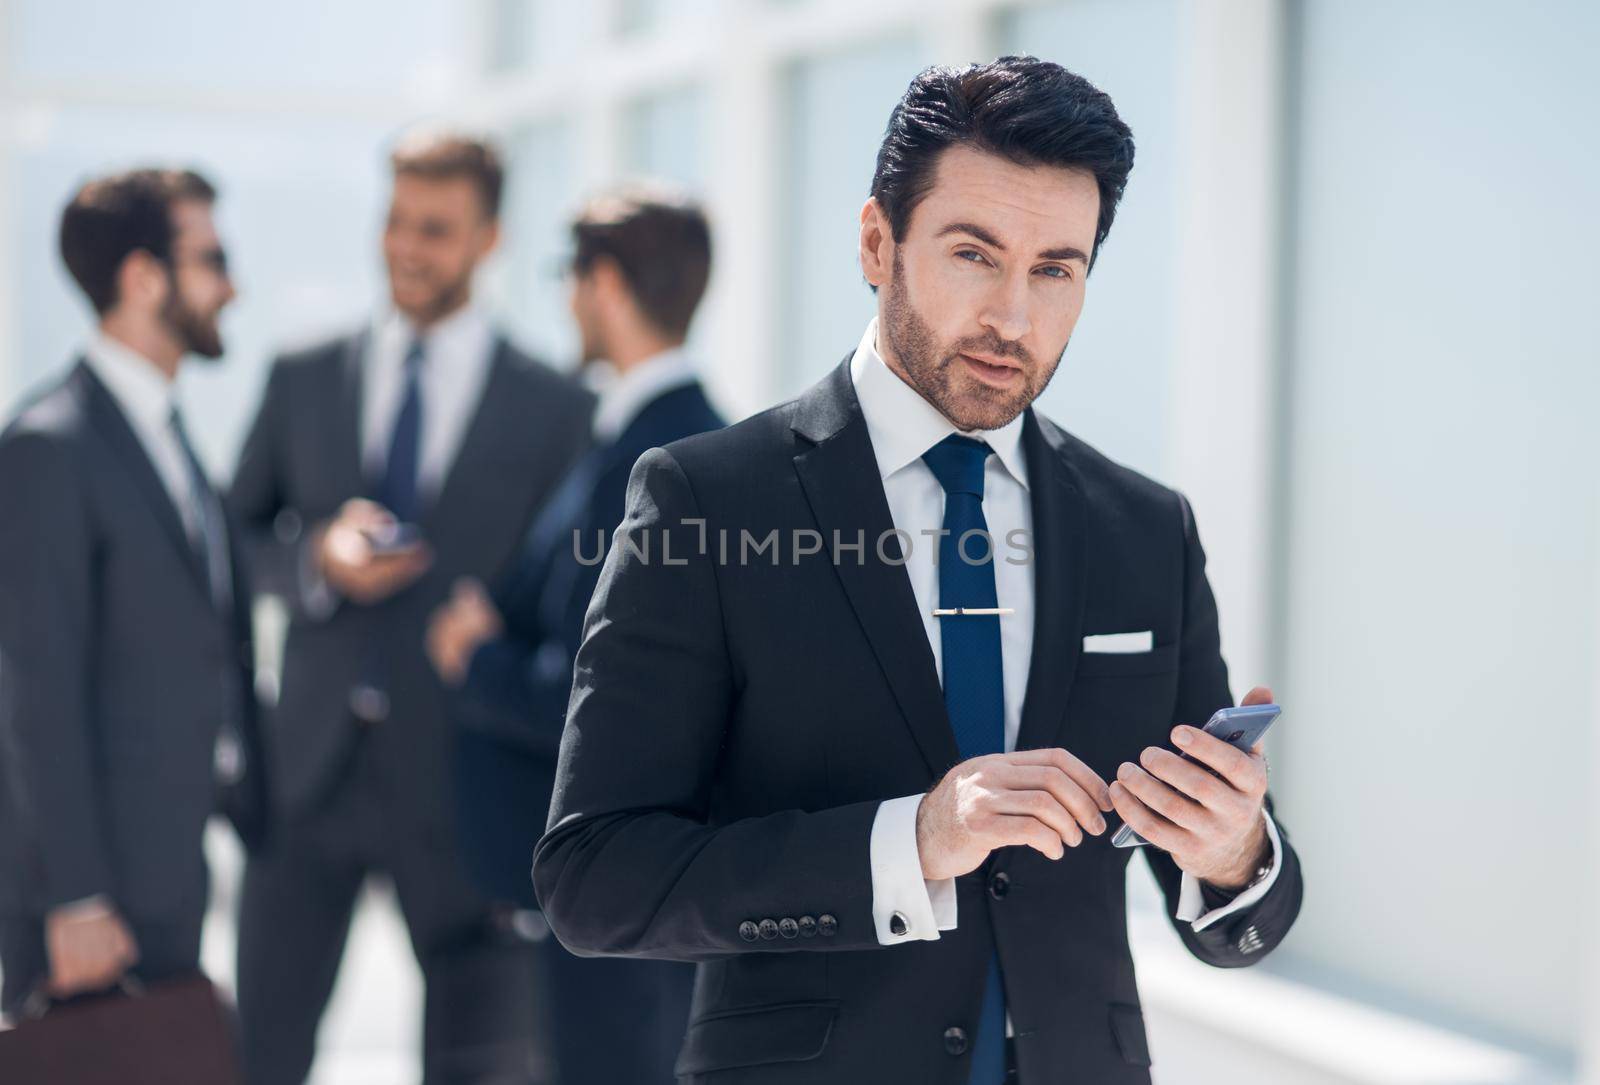 businessman looking at the smartphone screen .people and technology